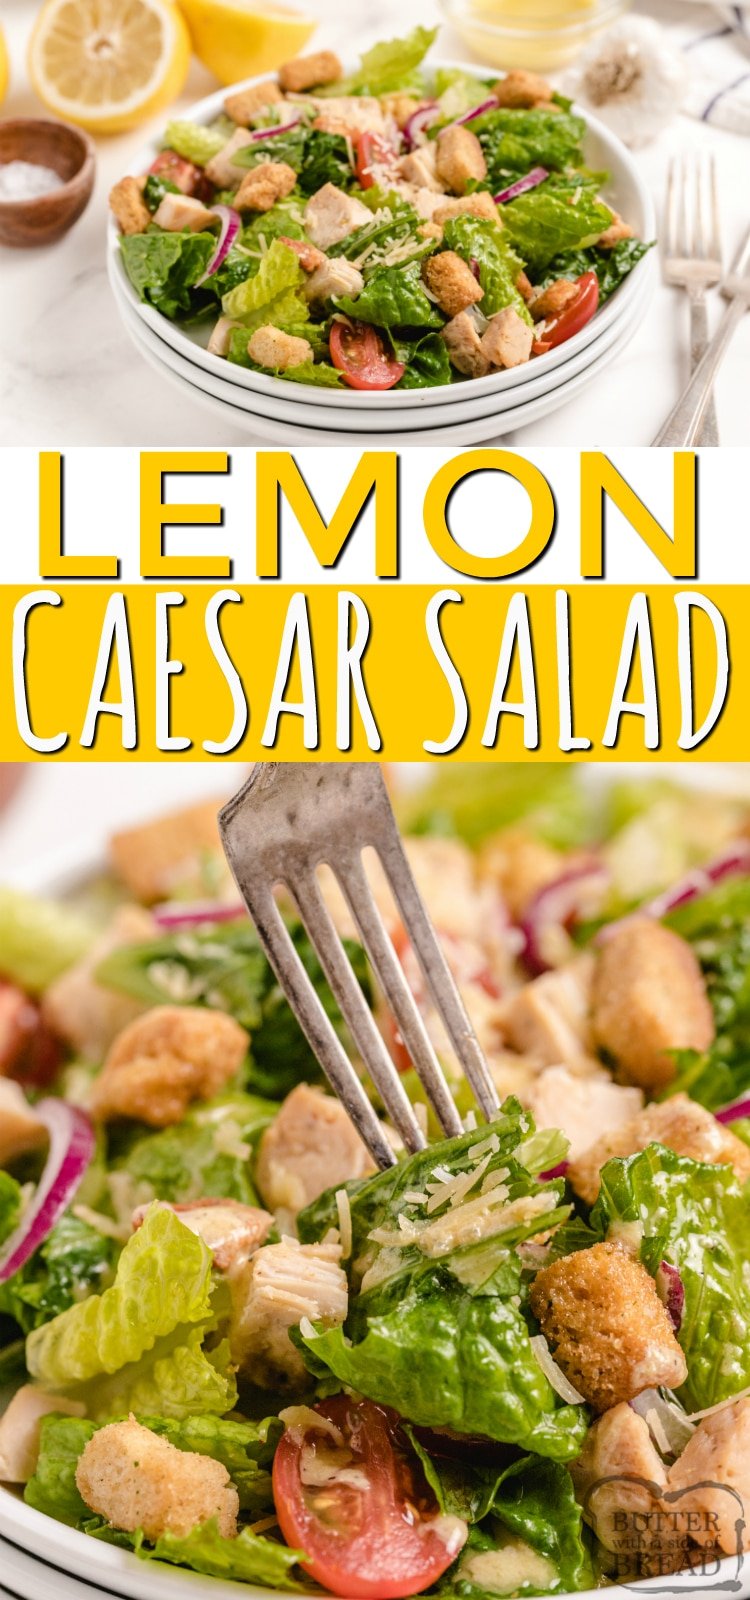 Lemon Caesar Salad is a simple and classic caesar salad recipe with a refreshing, homemade lemon caesar dressing. Serve as a side salad or add grilled chicken to make it an entree!